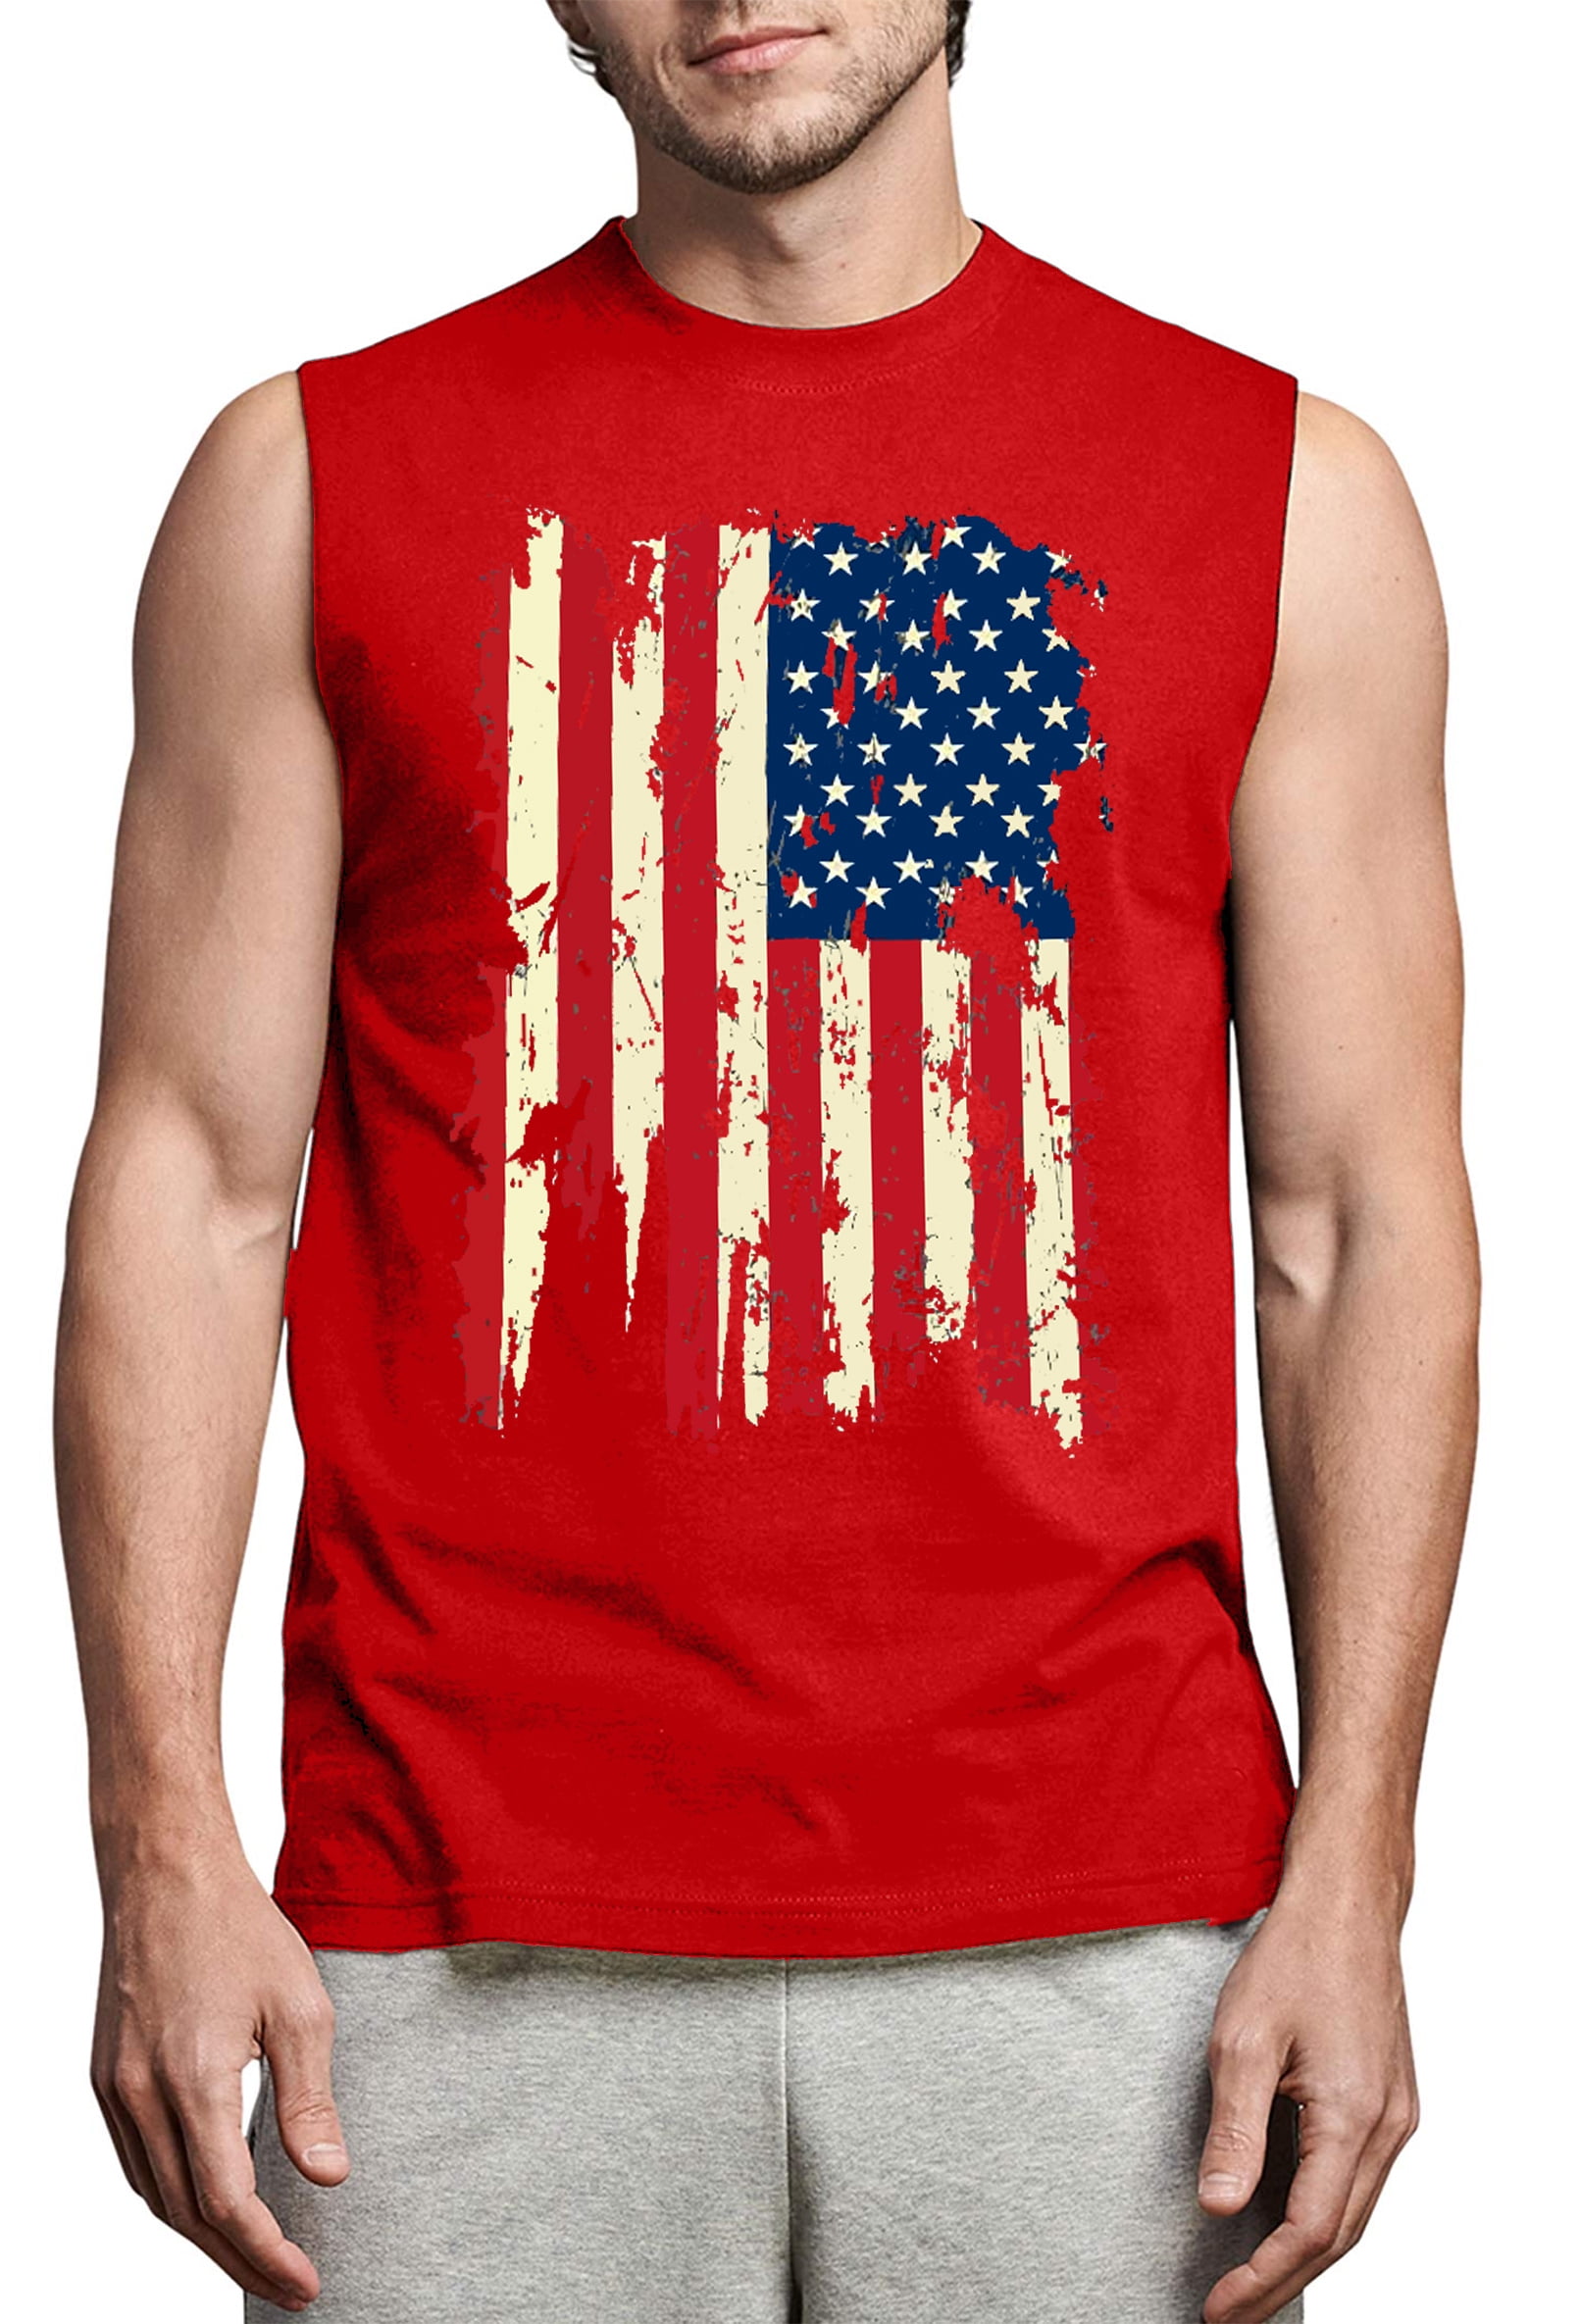 LAZYCHILD American Flag Tank Tops Mens 4th of July Shirts Patriotic ...